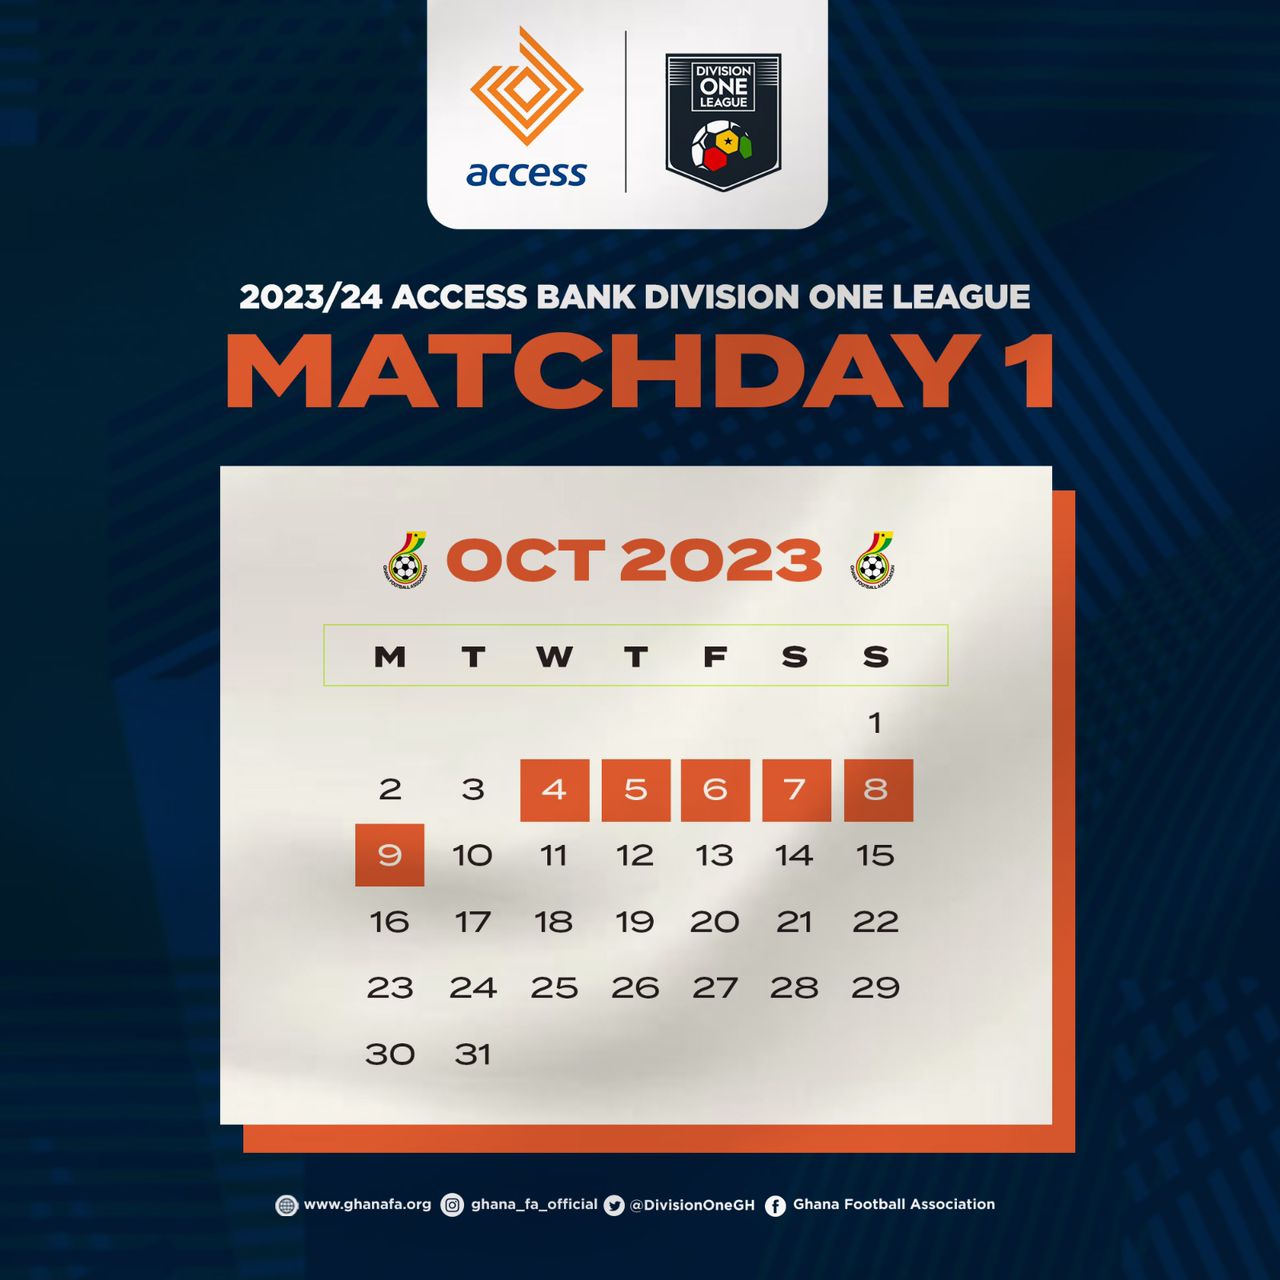 2023/24 Access Bank Division One League kick off set for Wednesday, October 4